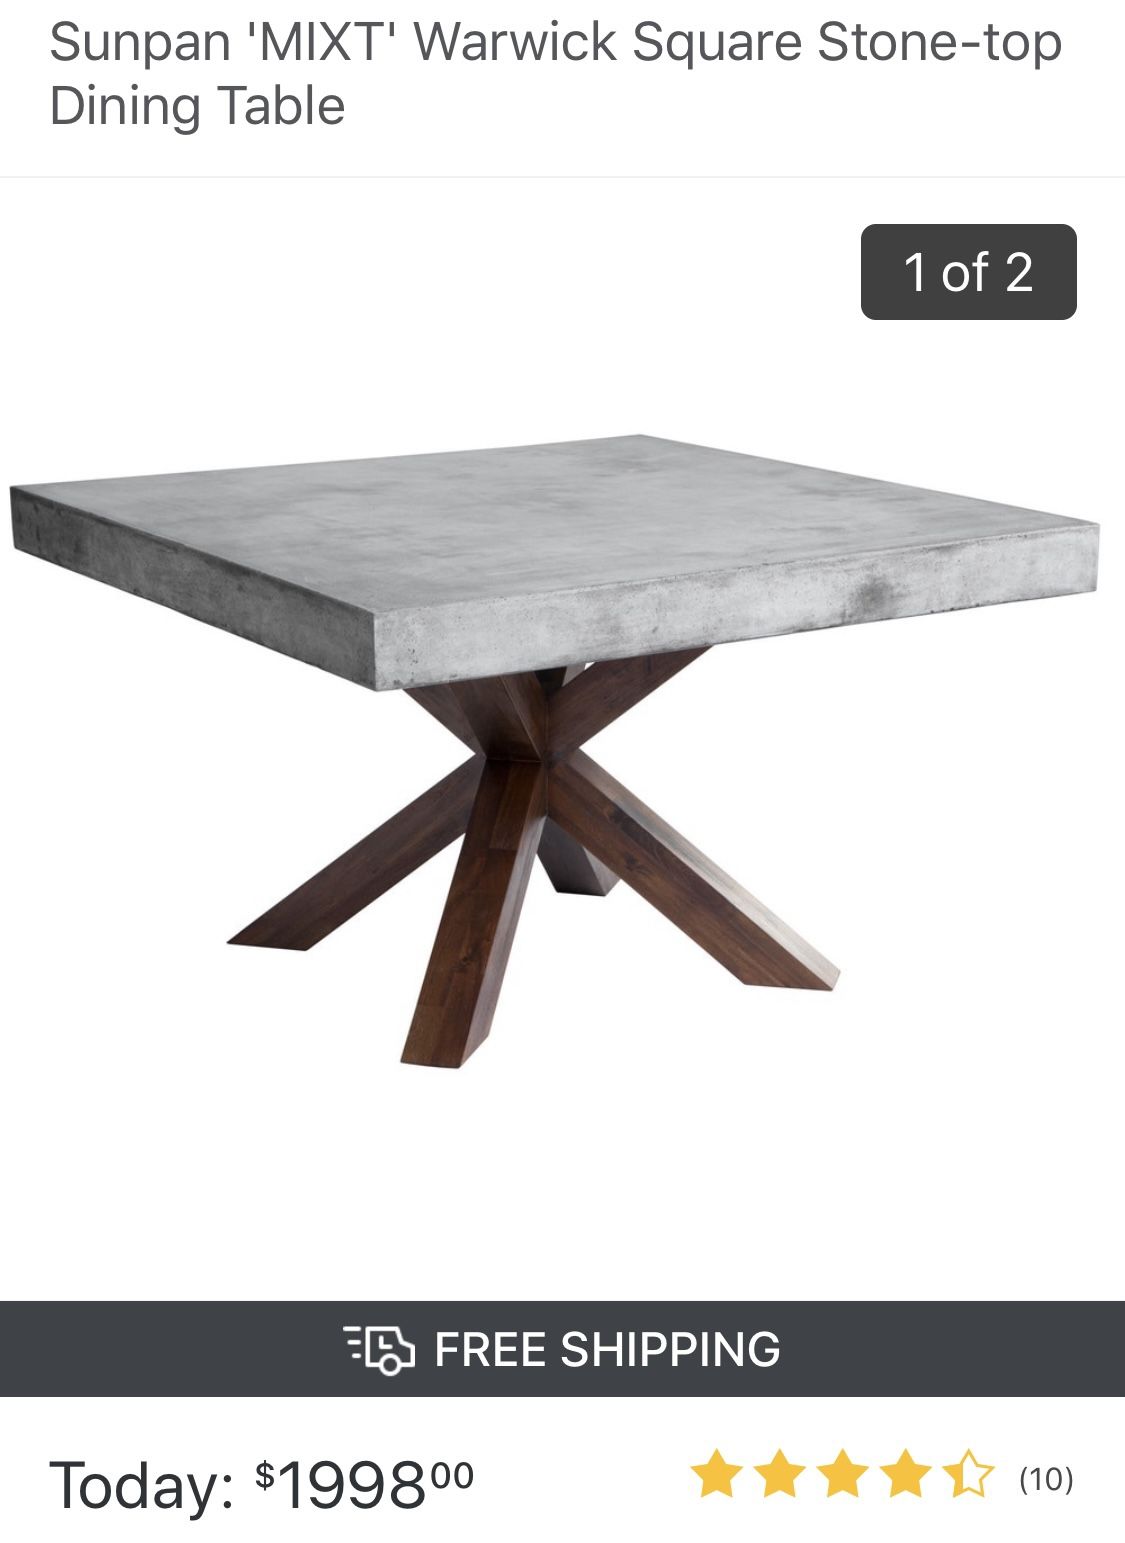 Stone top dining table